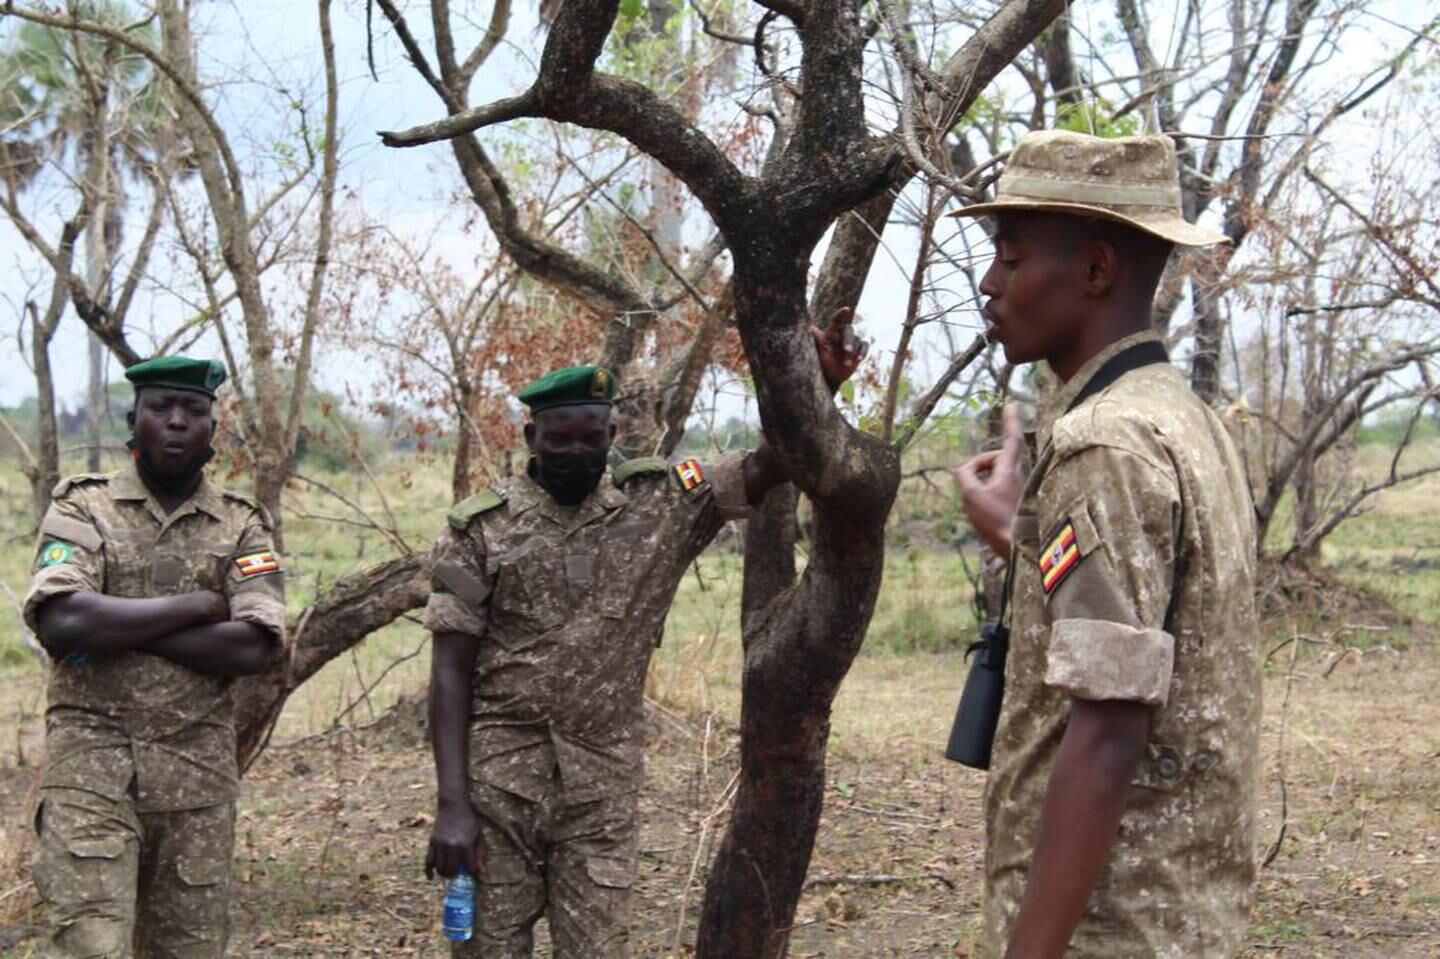 The Uganda Wildlife Authority has invested in more park rangers after a surge in poaching during the pandemic. Photo: Zebek